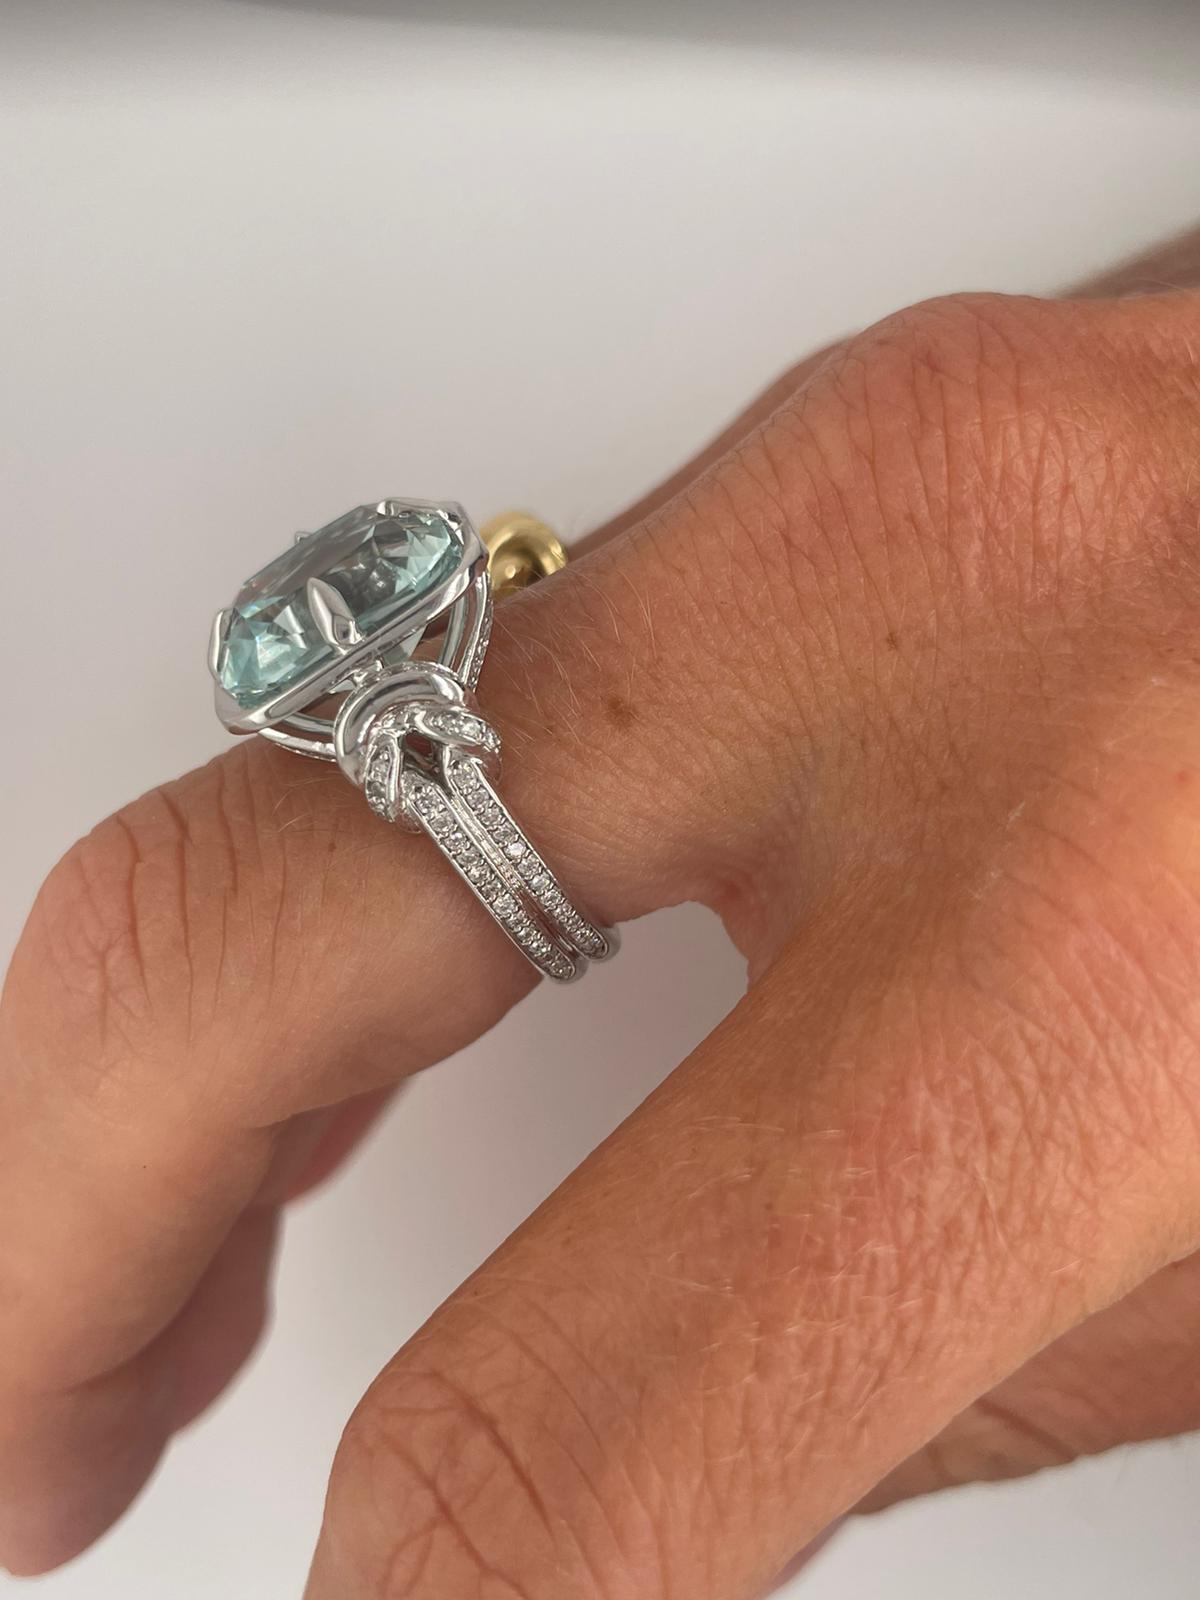 For Sale:  6ct Cushion Cut Aquamarine and Diamond Reef Knot Ring 20